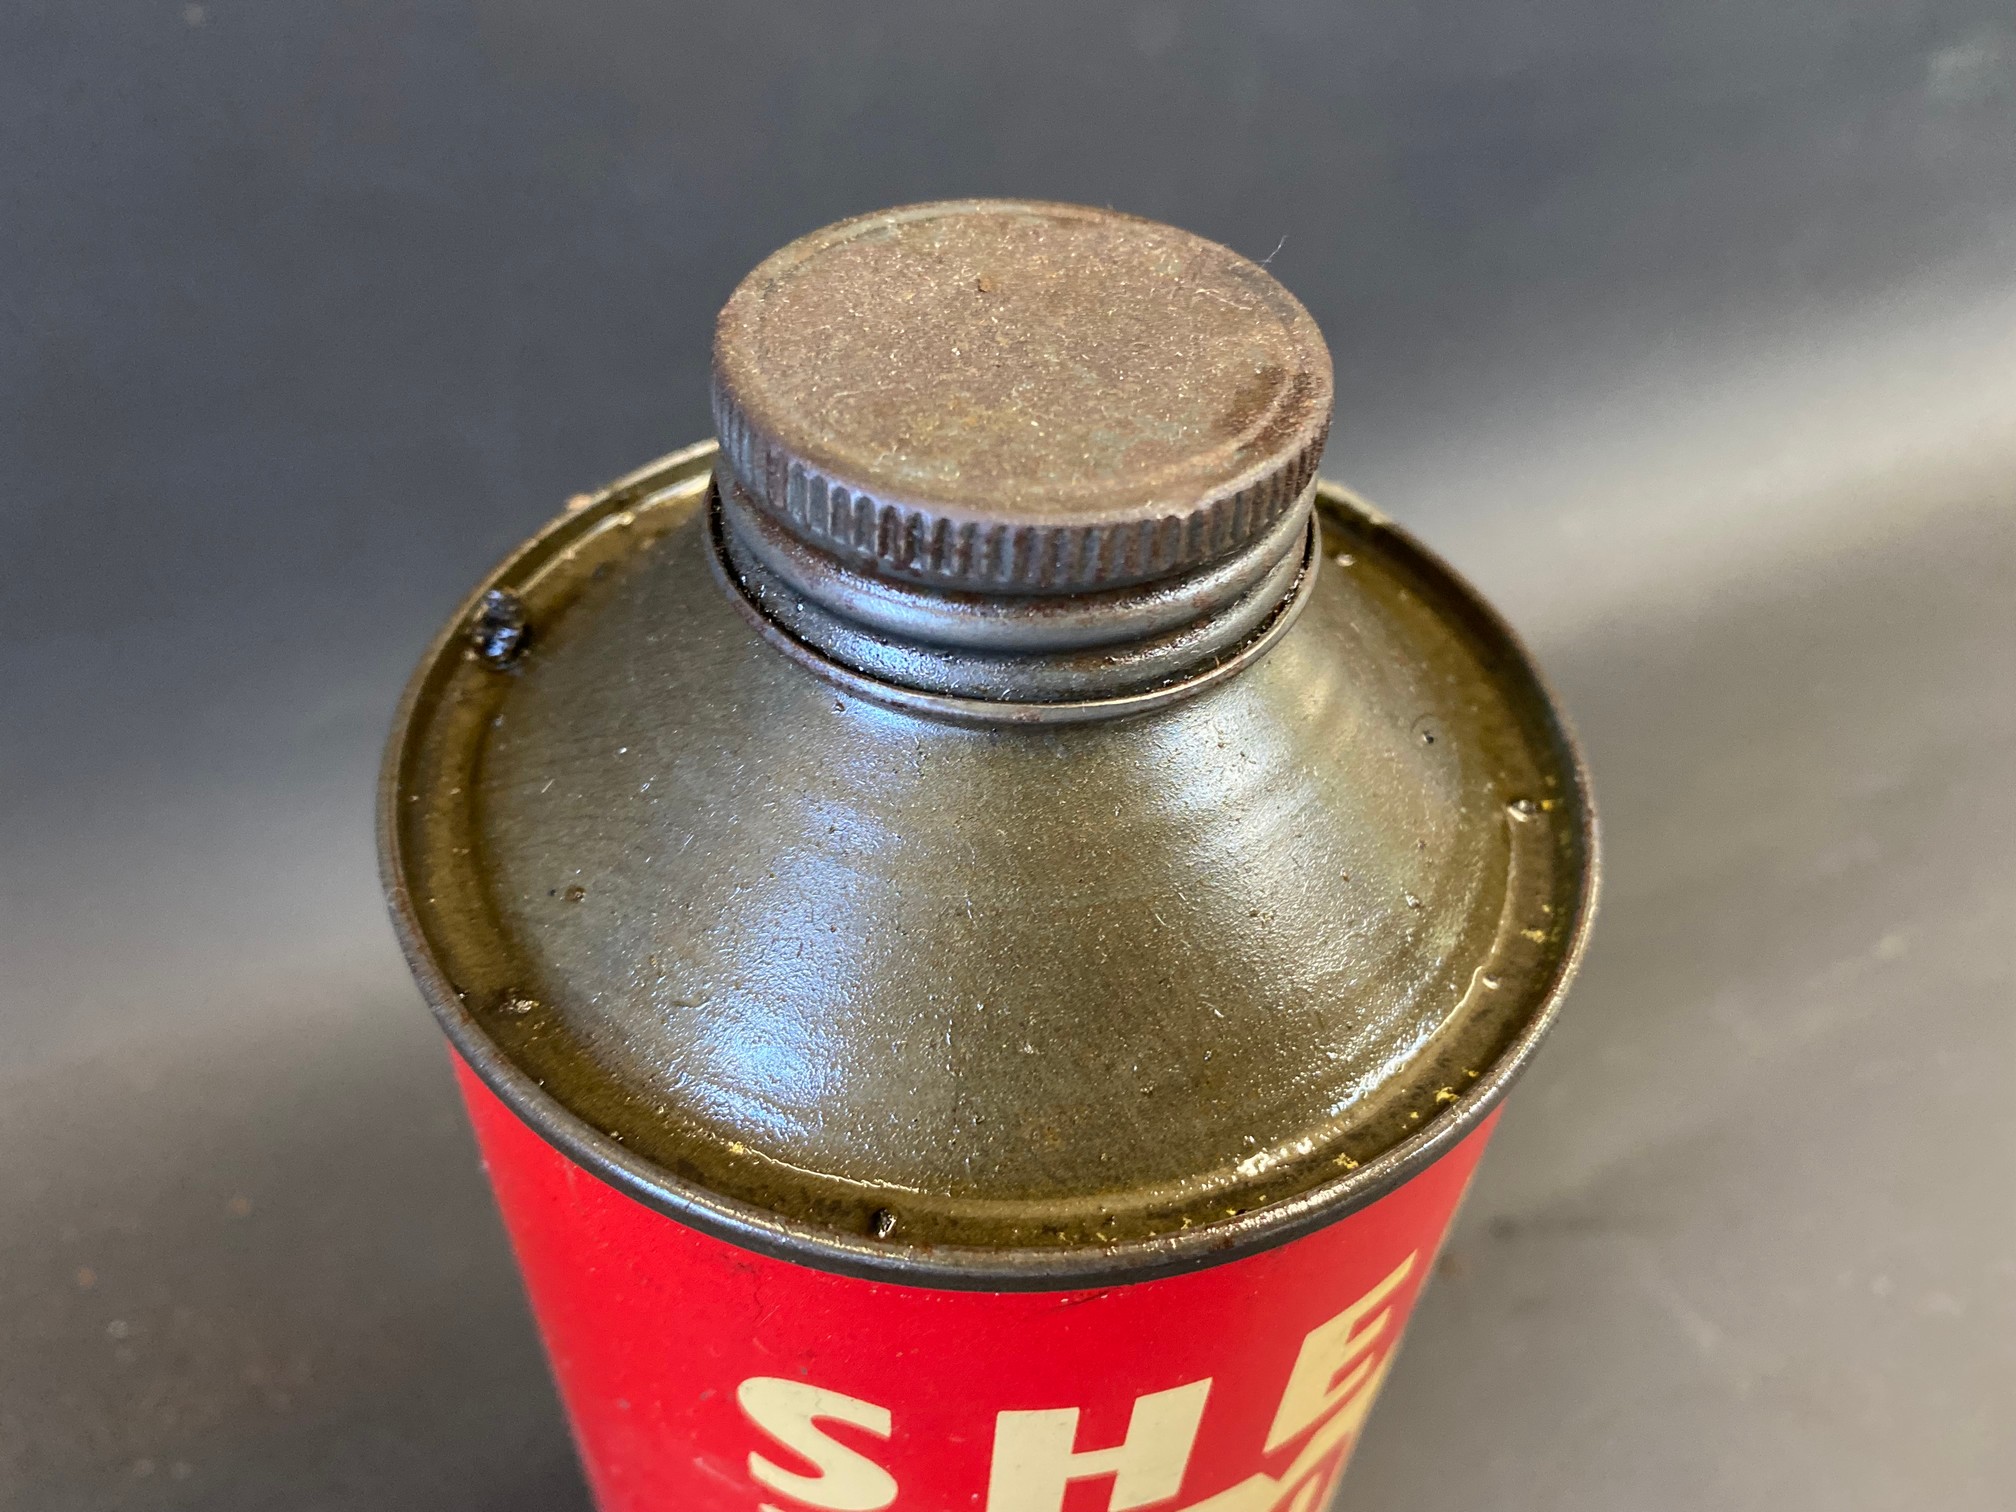 A Shell X-100 Motor Oil cylindrical quart can. - Image 3 of 4